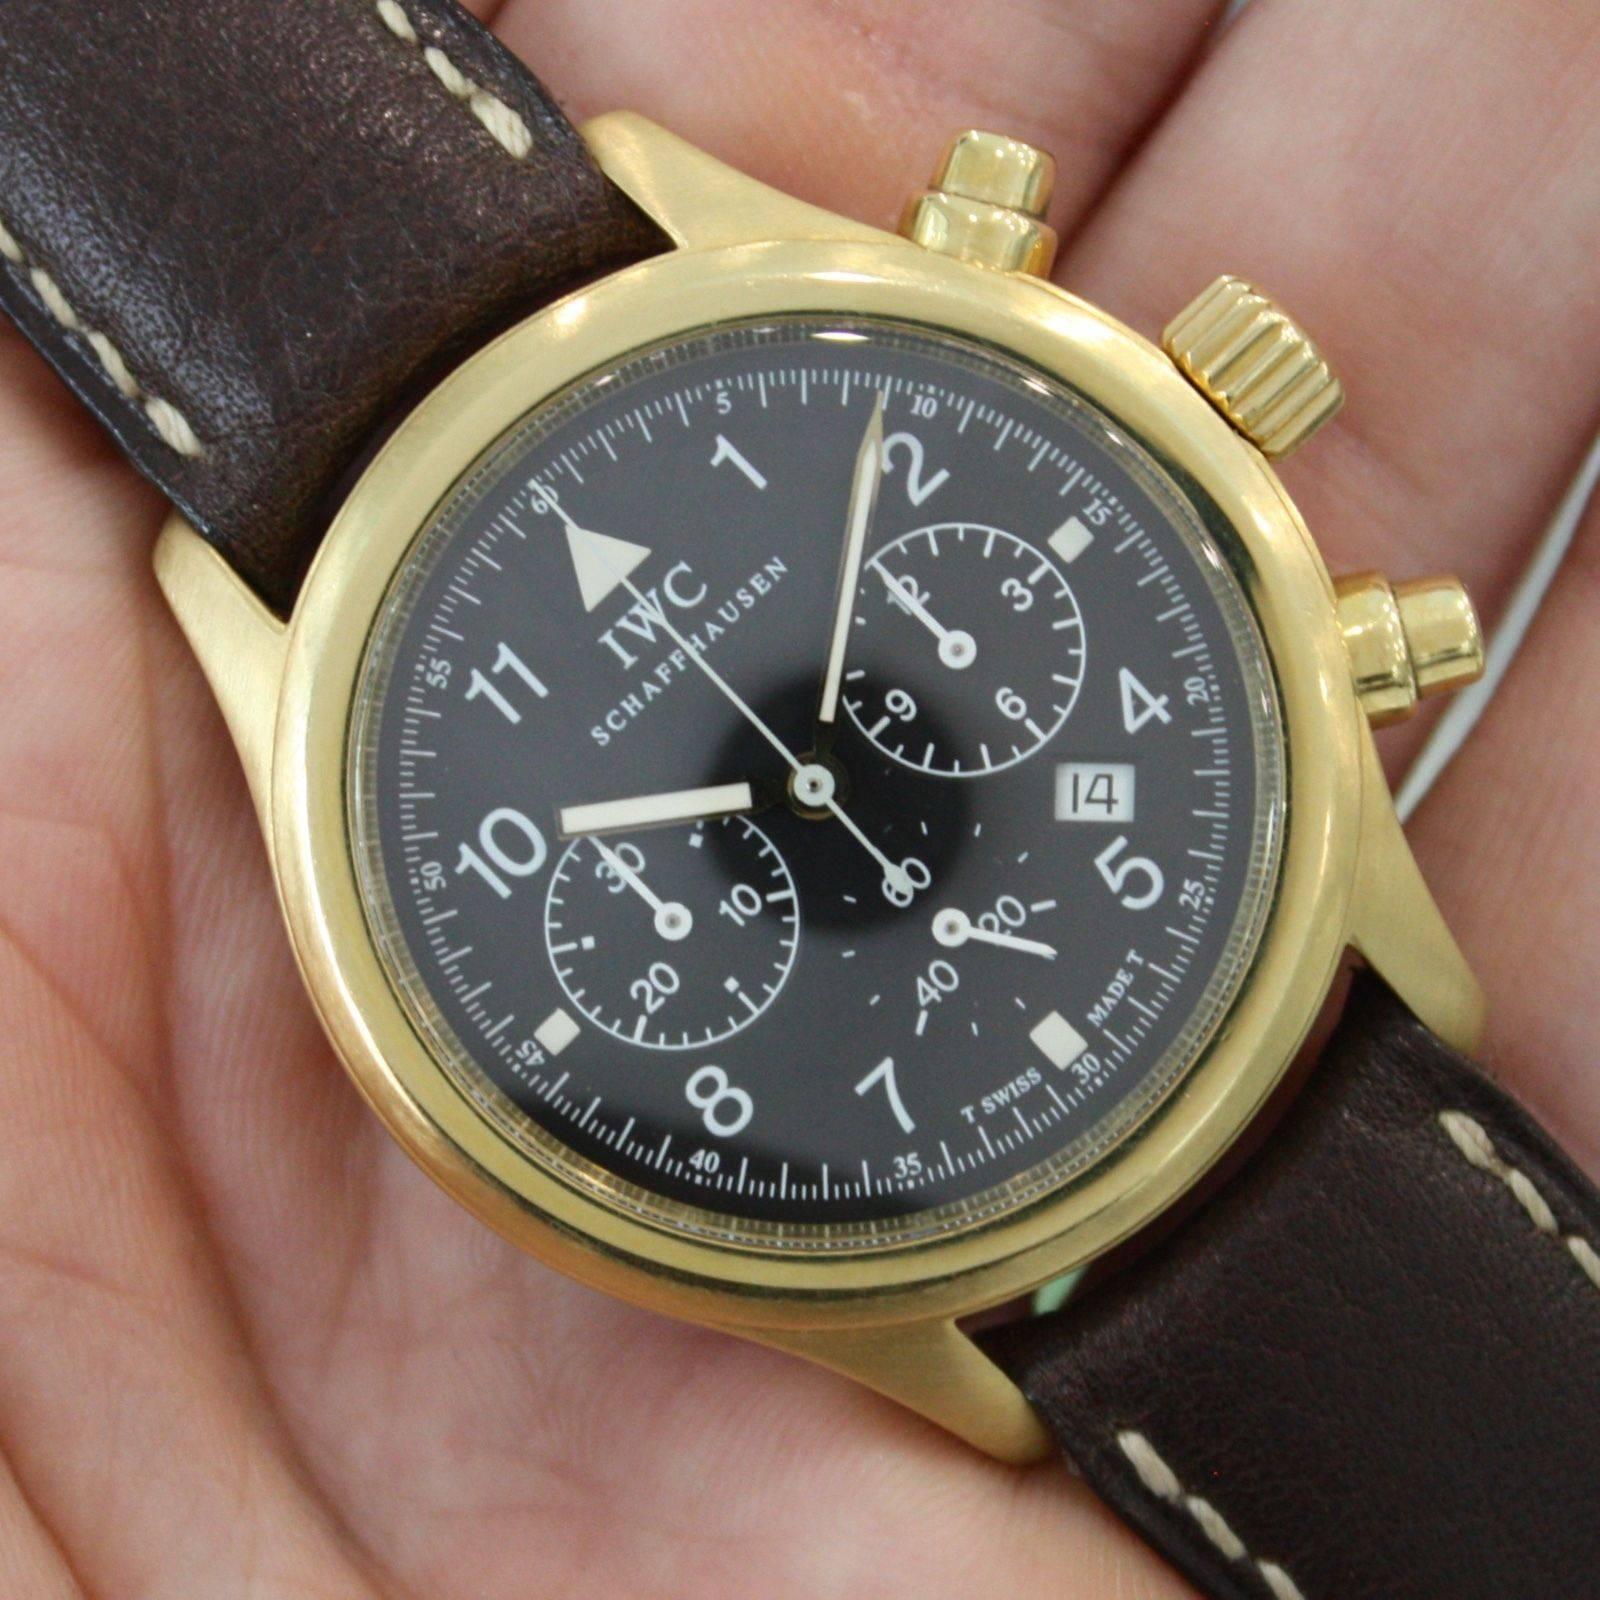 Brand Name	IWC
Style Number	IW3741-03
Also Called	3741, 3741003, 3741-03
Series	Pilot's Flieger Chronograph
Gender	Men's
Case Material	18k Yellow Gold
Dial Color	Matte Black
Movement	Mecaquartz
Engine	JLC Cal. 631 - 25